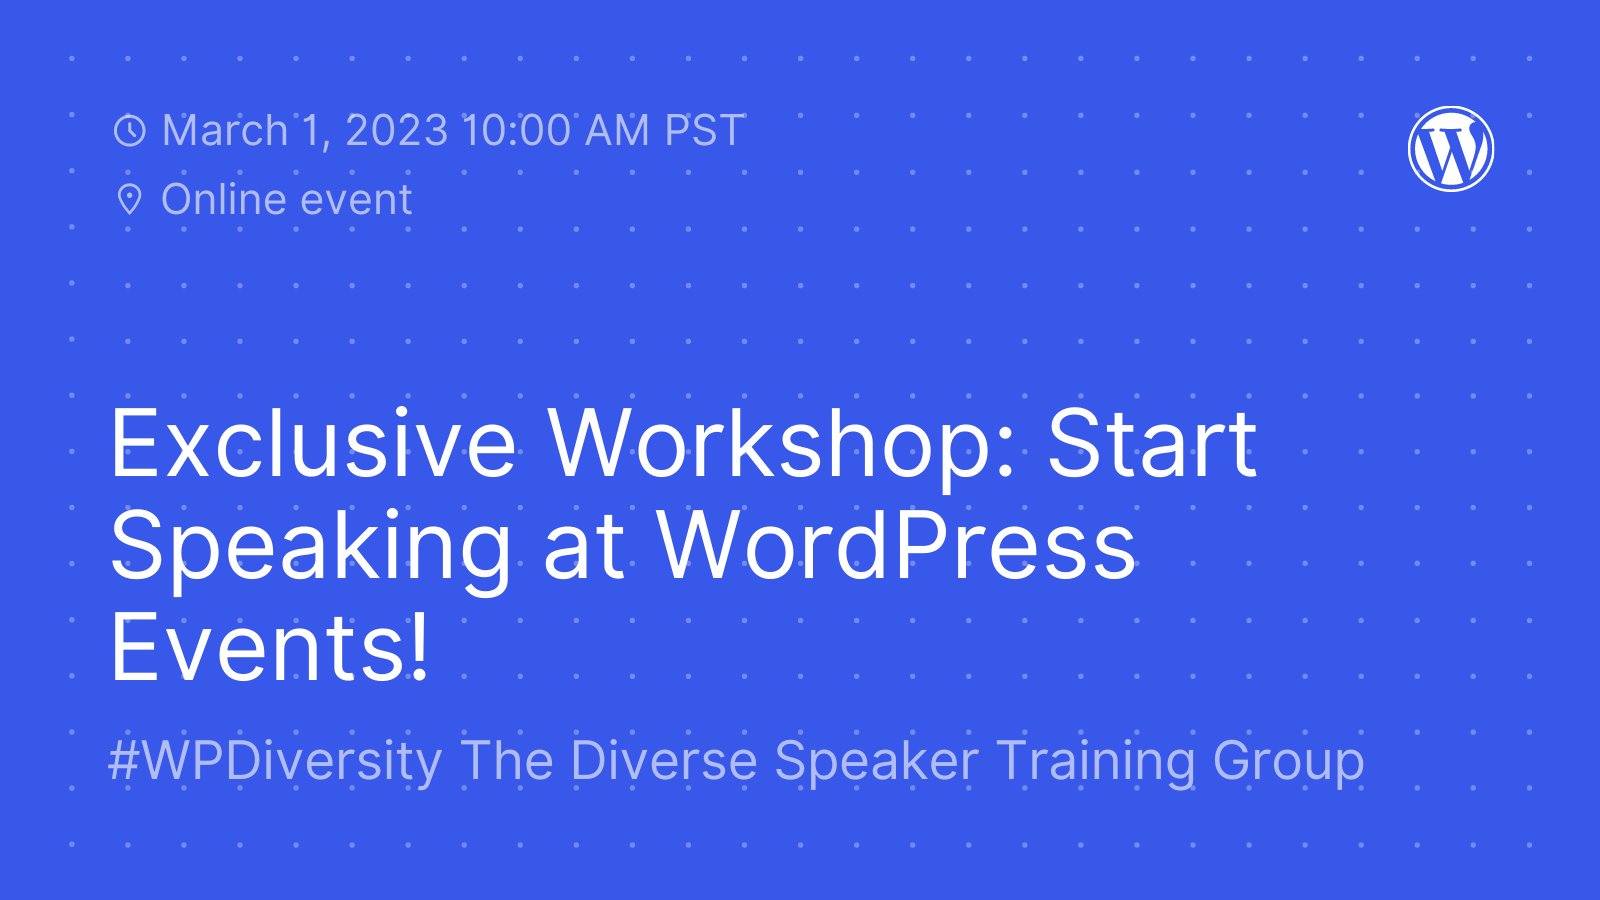 Blue background with white dots and text, "March 1, 2023 10:00 AM PST. Online event. Exclusive Workshop: Start Speaking at WordPress Events! WP Diversity The Diverse Speaker Training Group"